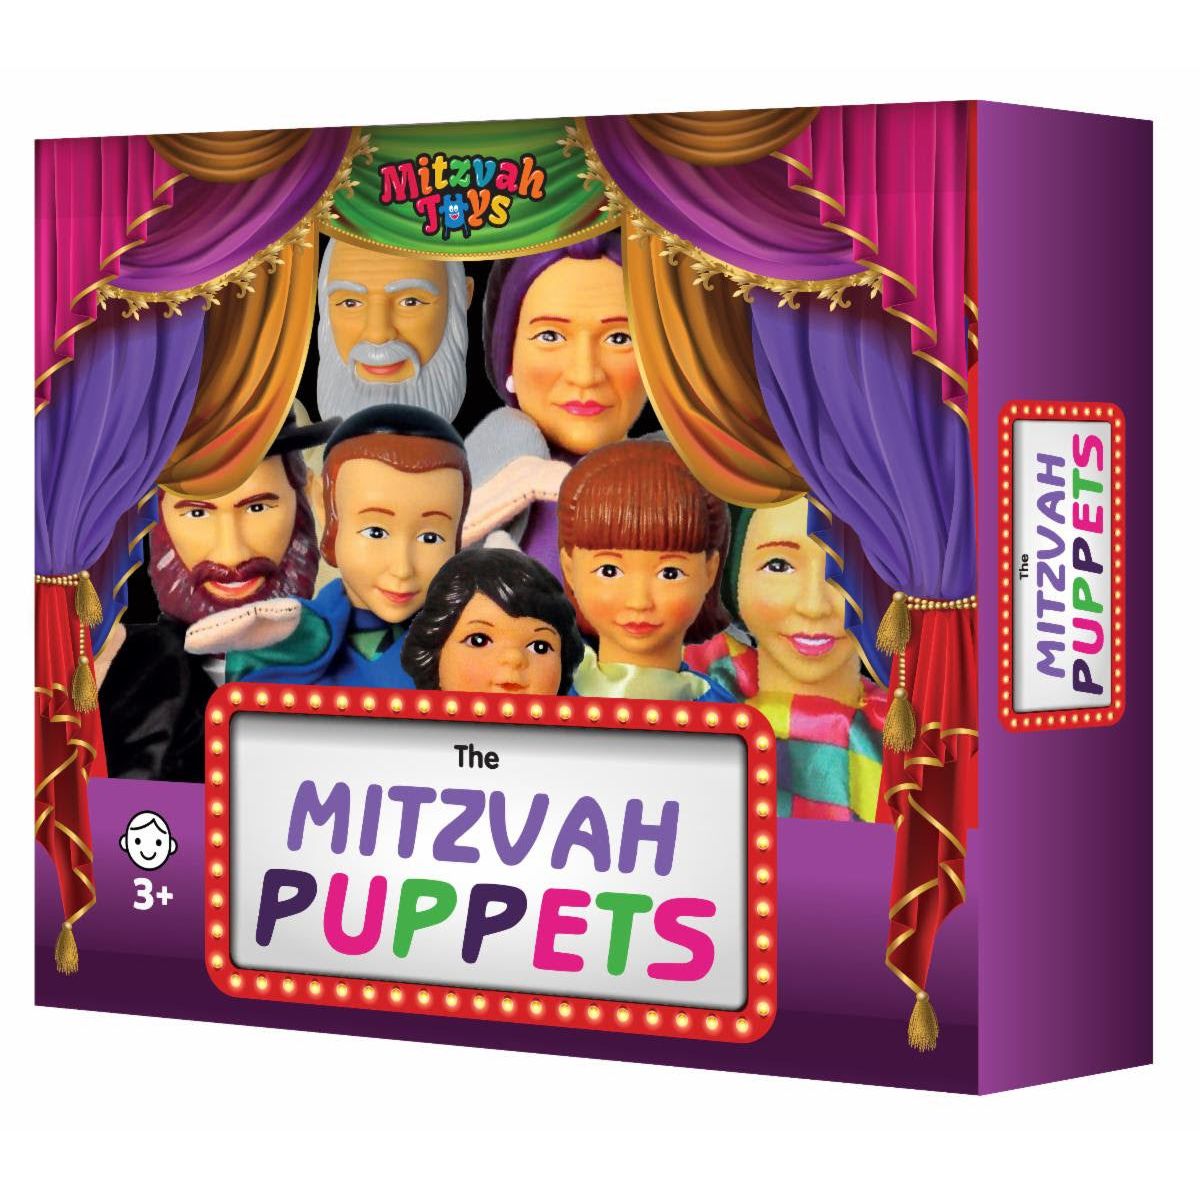 The Mitzvah Puppets